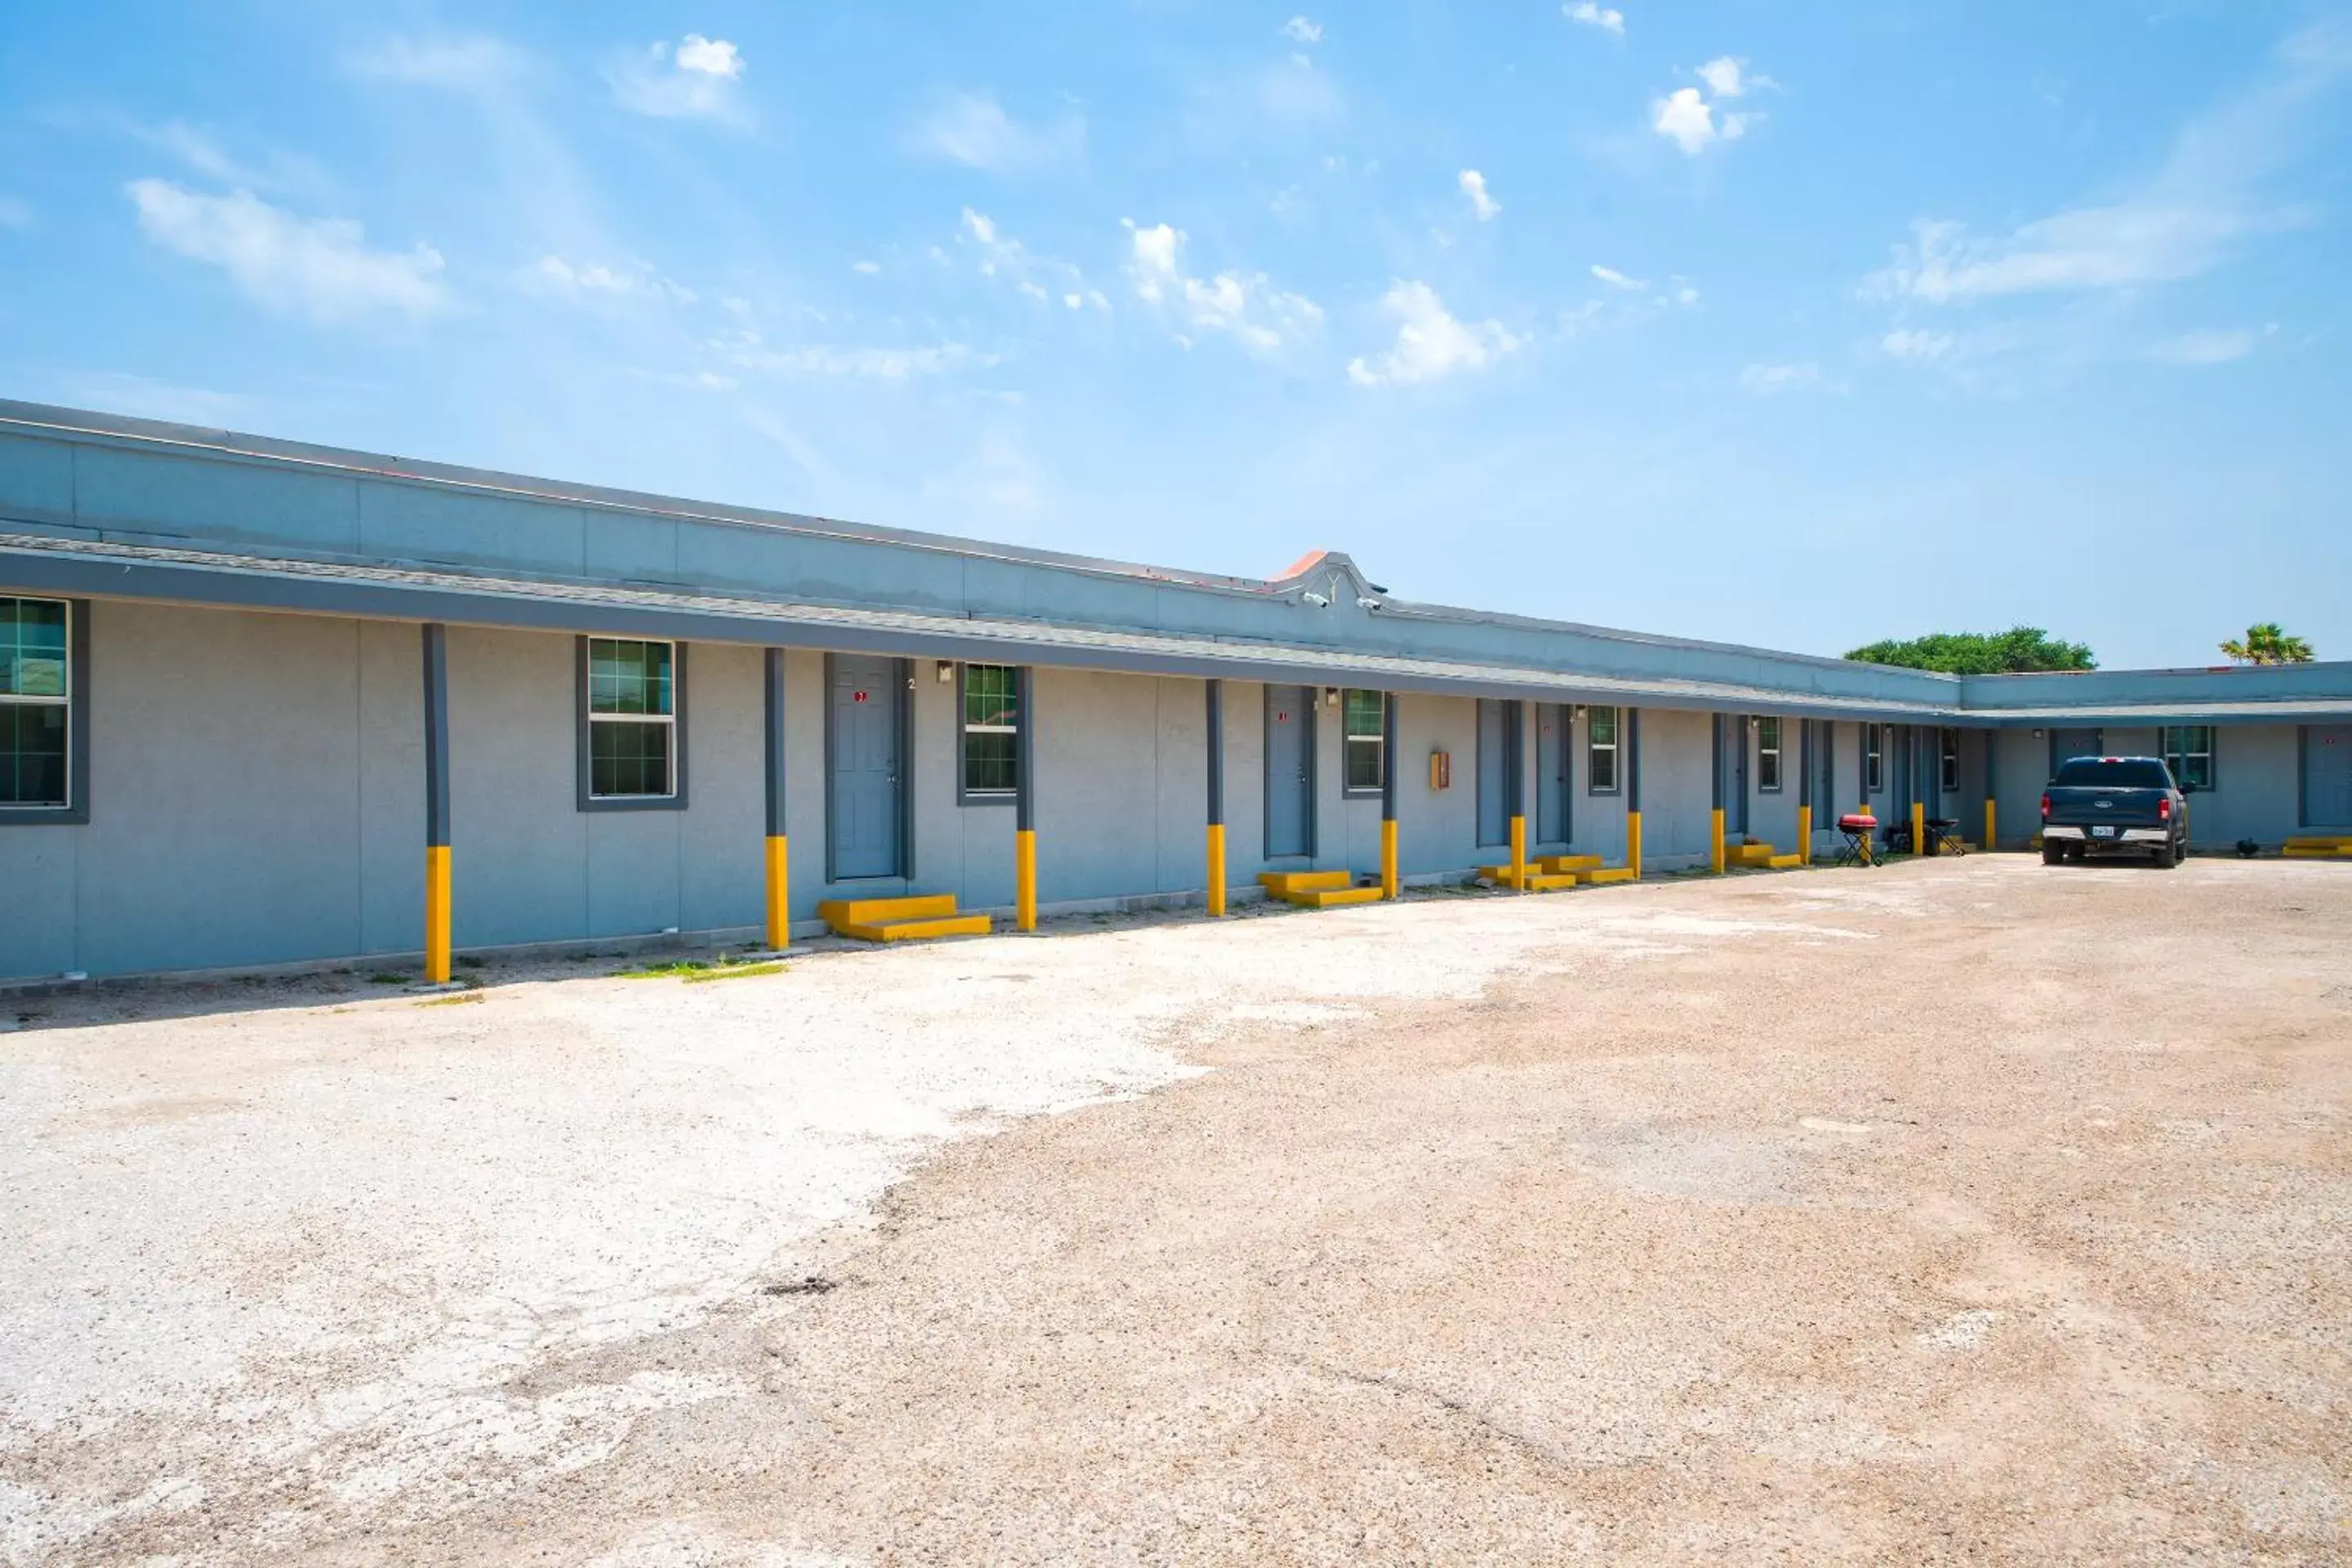 Parking, Property Building in Plaza Motel Corpus Christi by OYO